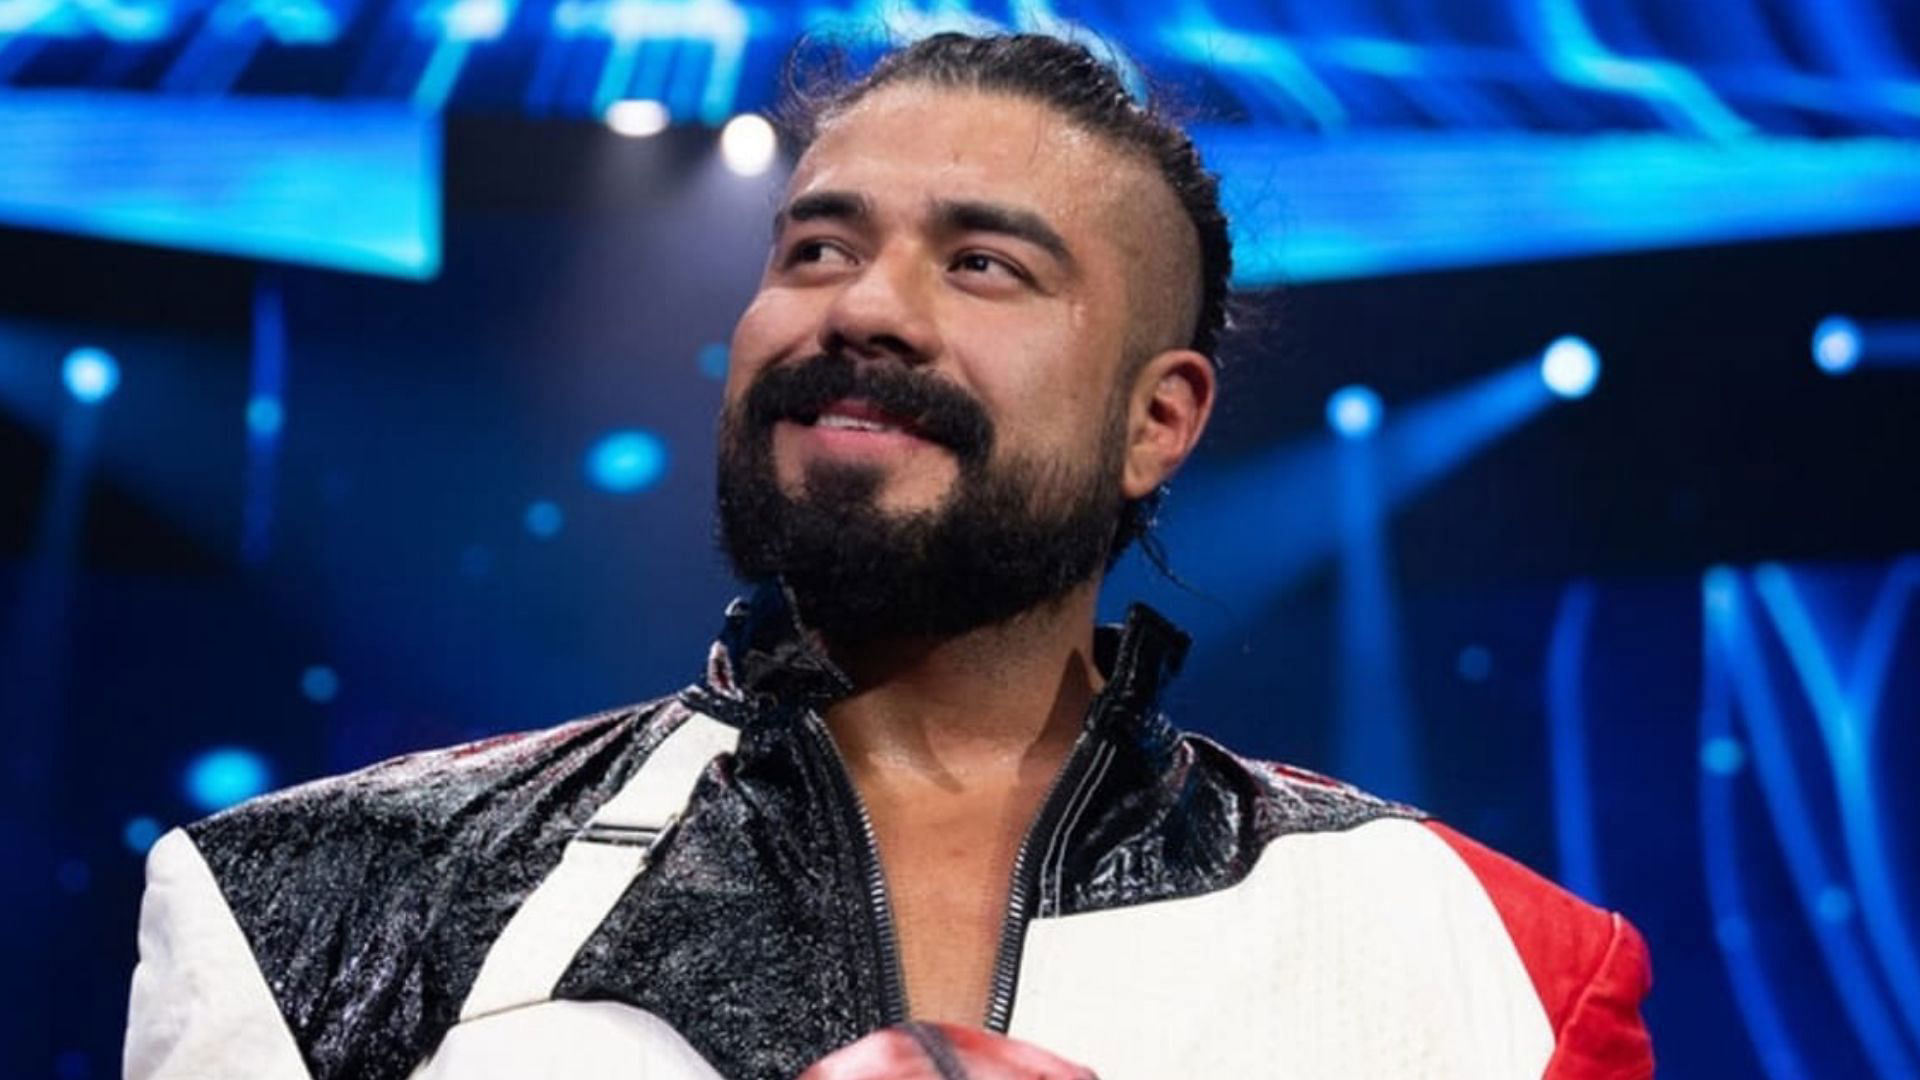 5 directions for Andrade El Idolo following AEW exit